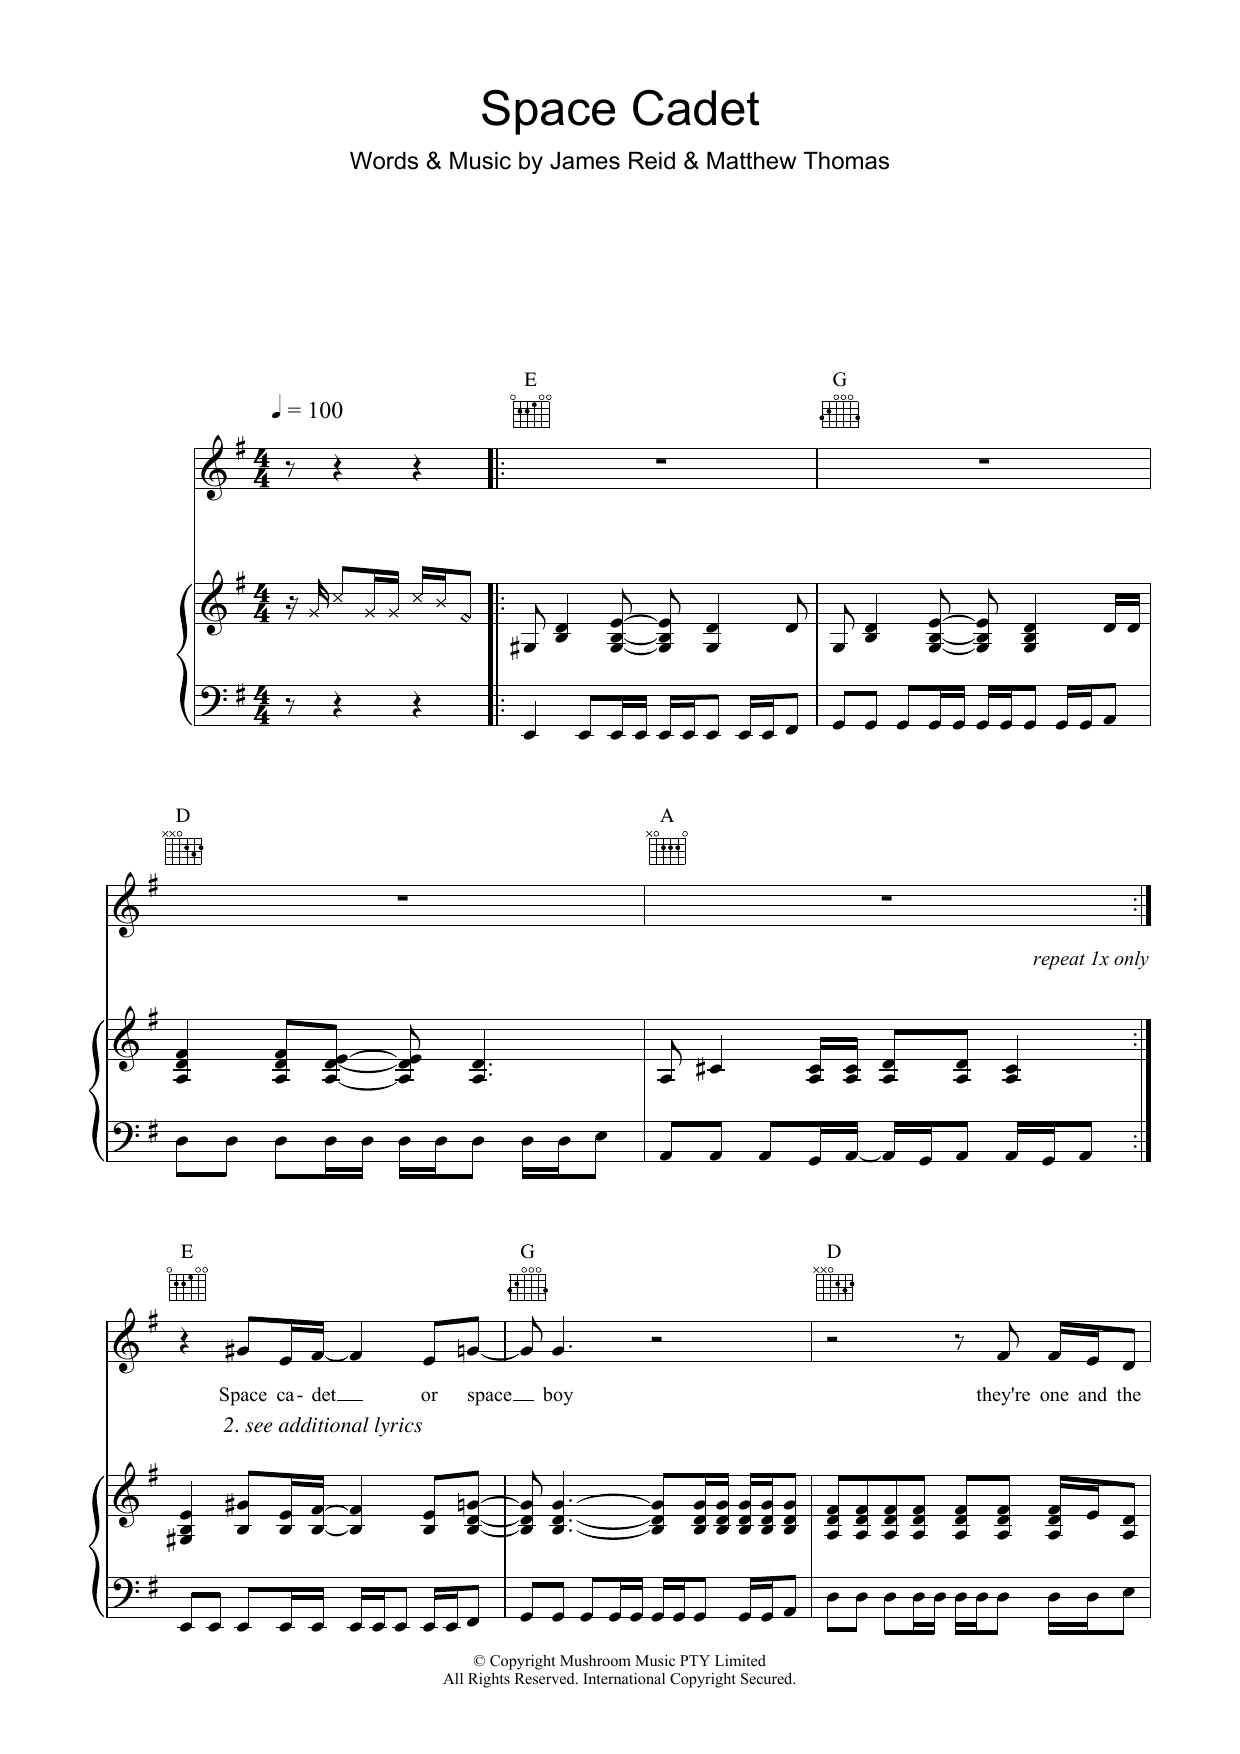 Download The Feelers Space Cadet Sheet Music